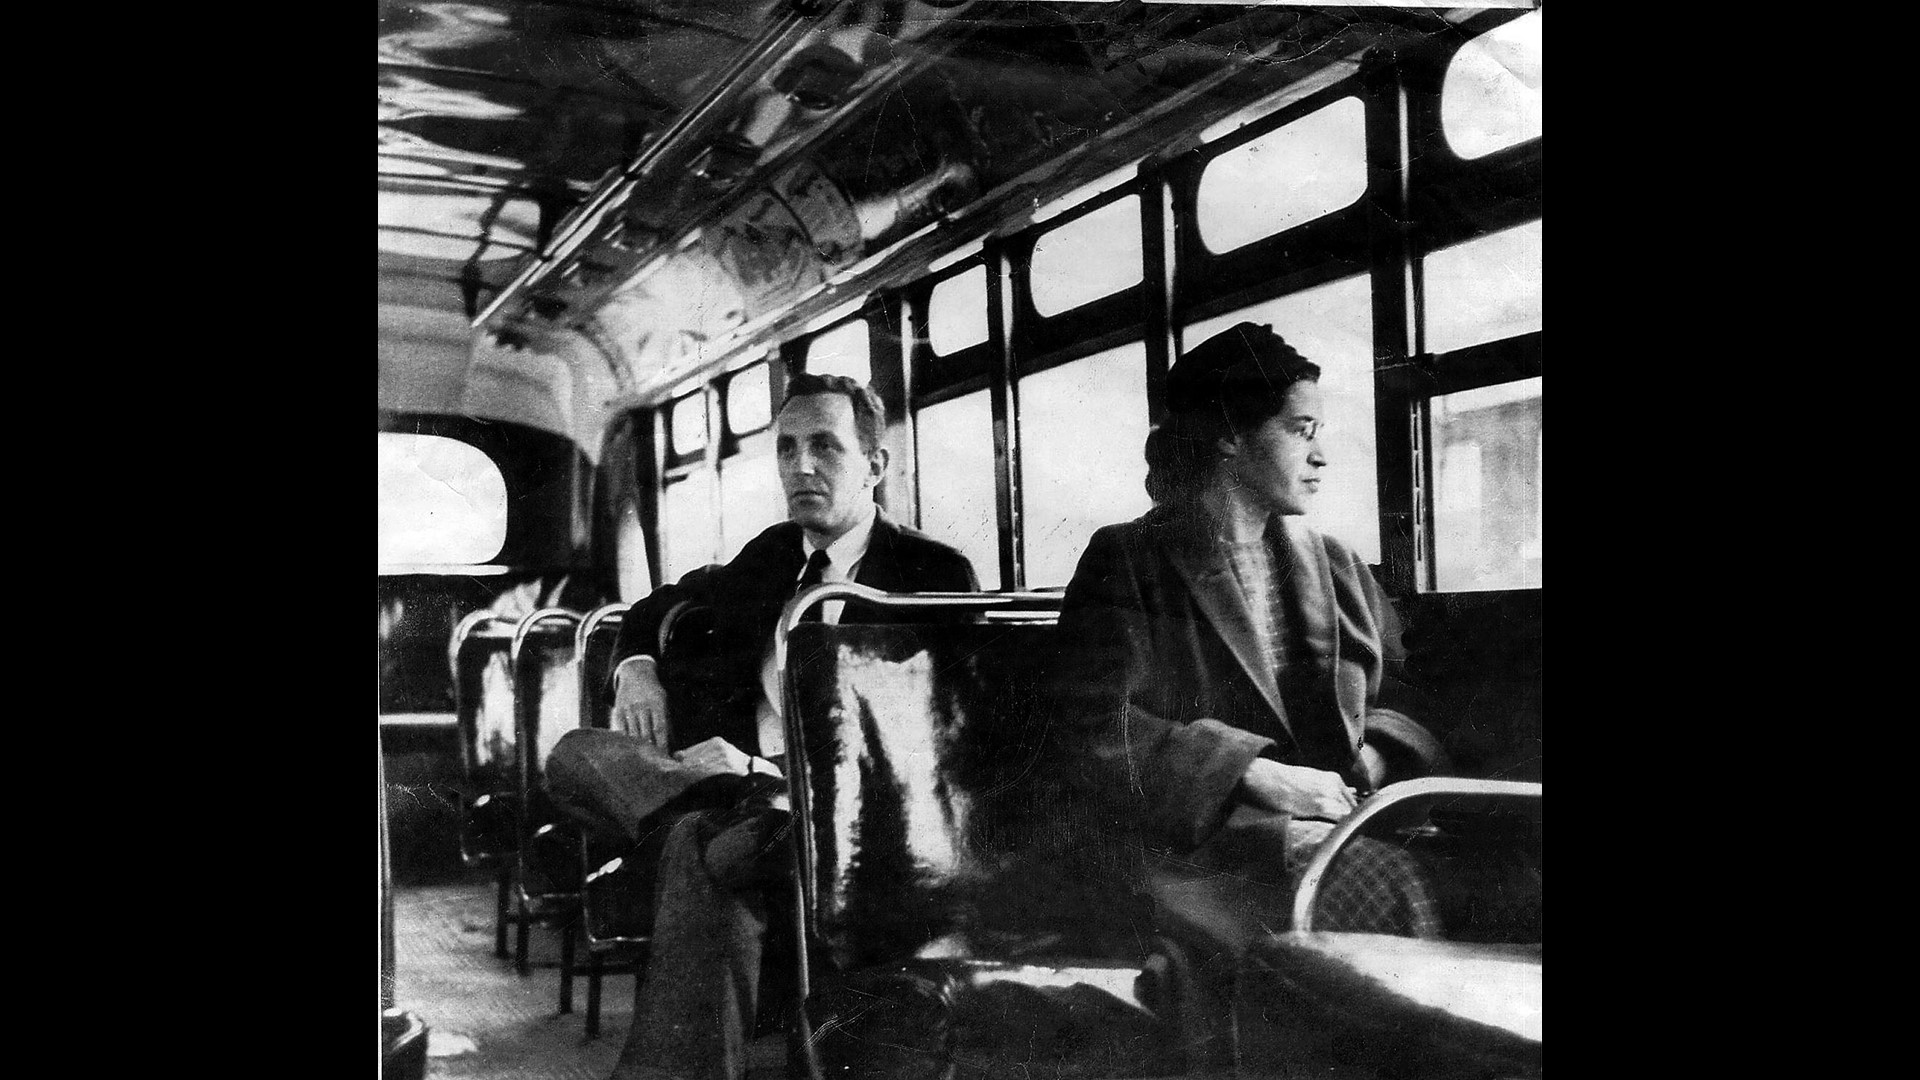 Today marks the anniversary of Rosa Parks arrest on a bus in Montgomery, Alabama. Her act of bravery helped to spark the American mid-century Civil Rights movement.